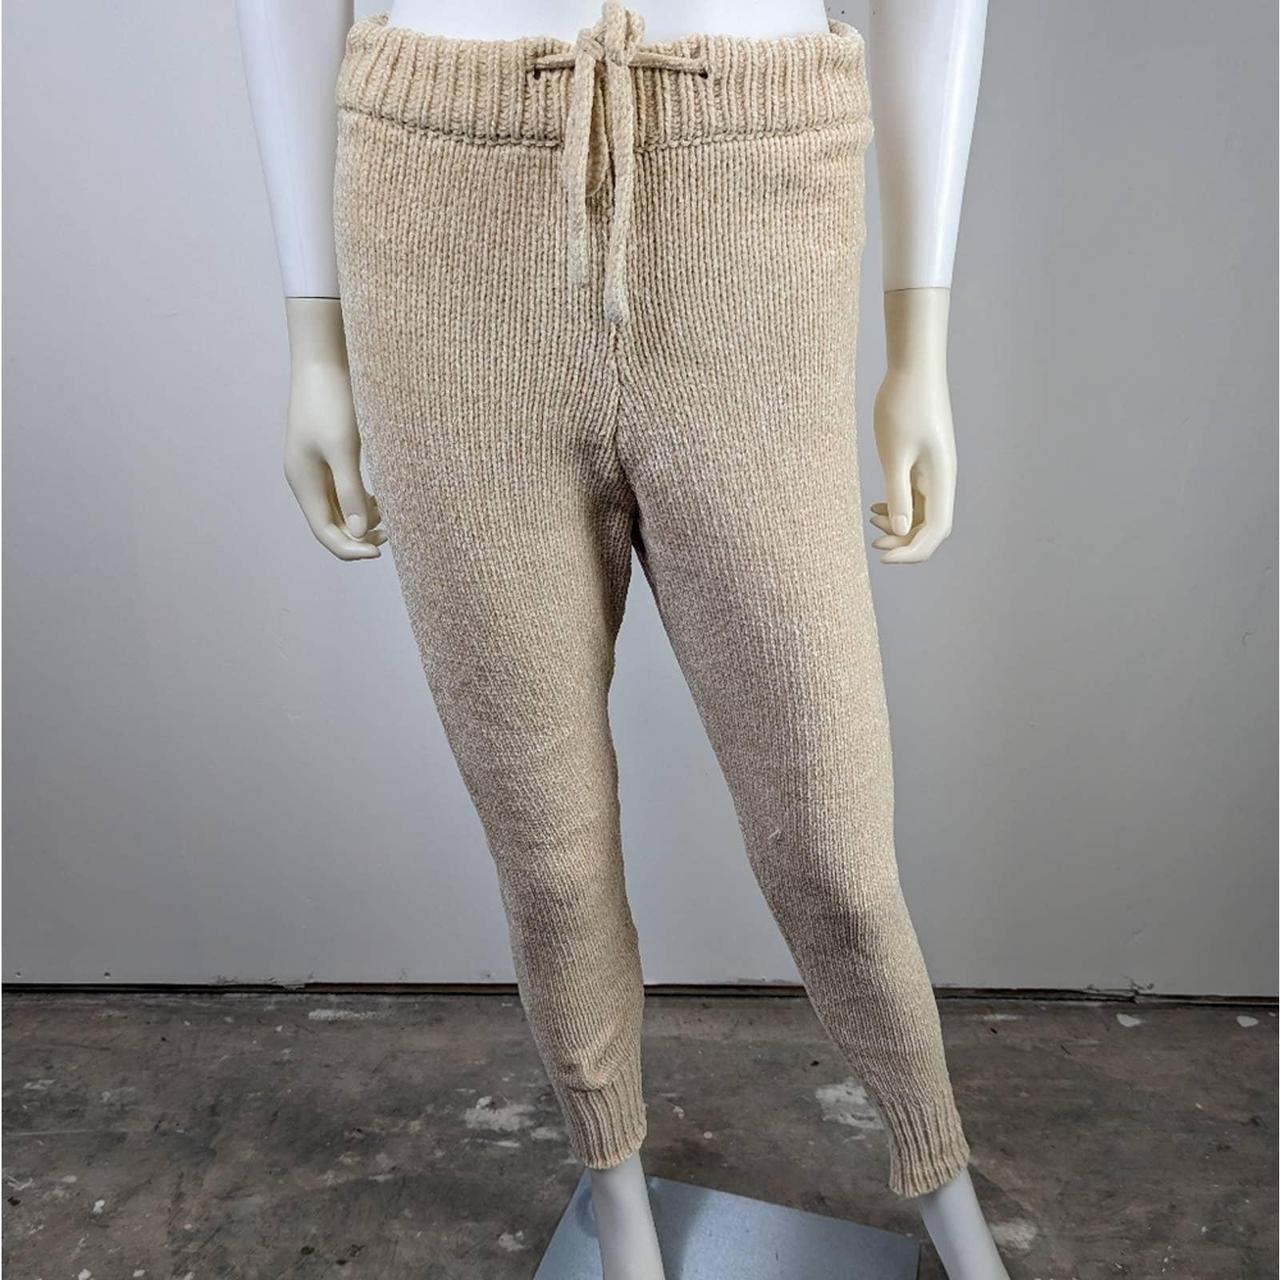 Ribbed Tan Sweater Pants 100% Polyester Tie at - Depop